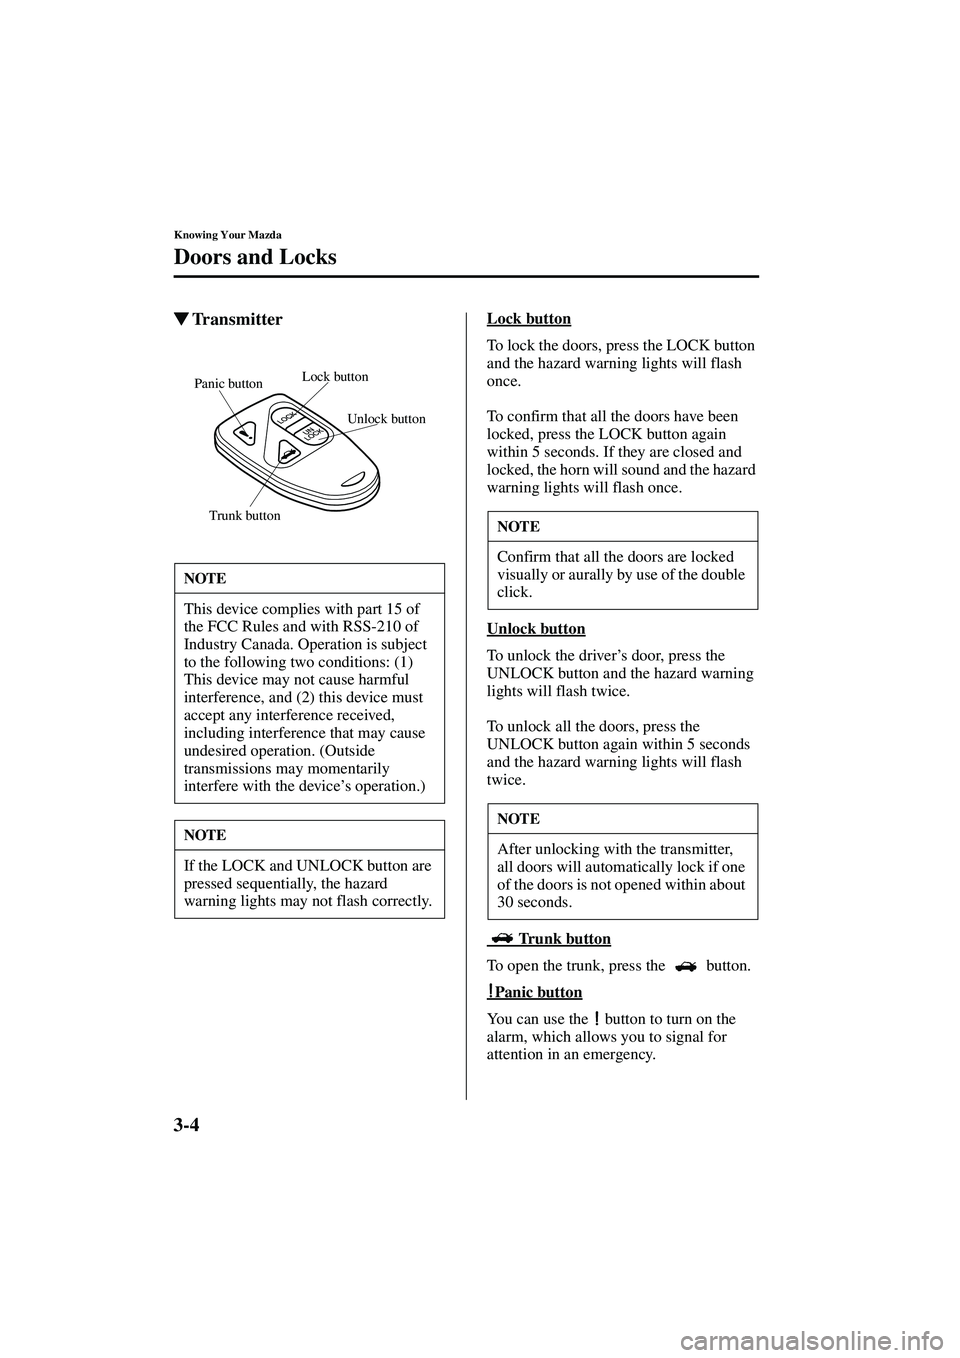 MAZDA MODEL MX-5 MIATA 2003  Owners Manual 3-4
Knowing Your Mazda
Doors and Locks
Form No. 8R09-EA-02G
TransmitterLock button
To lock the doors, press the LOCK button 
and the hazard warning lights will flash 
once.
To confirm that all the do